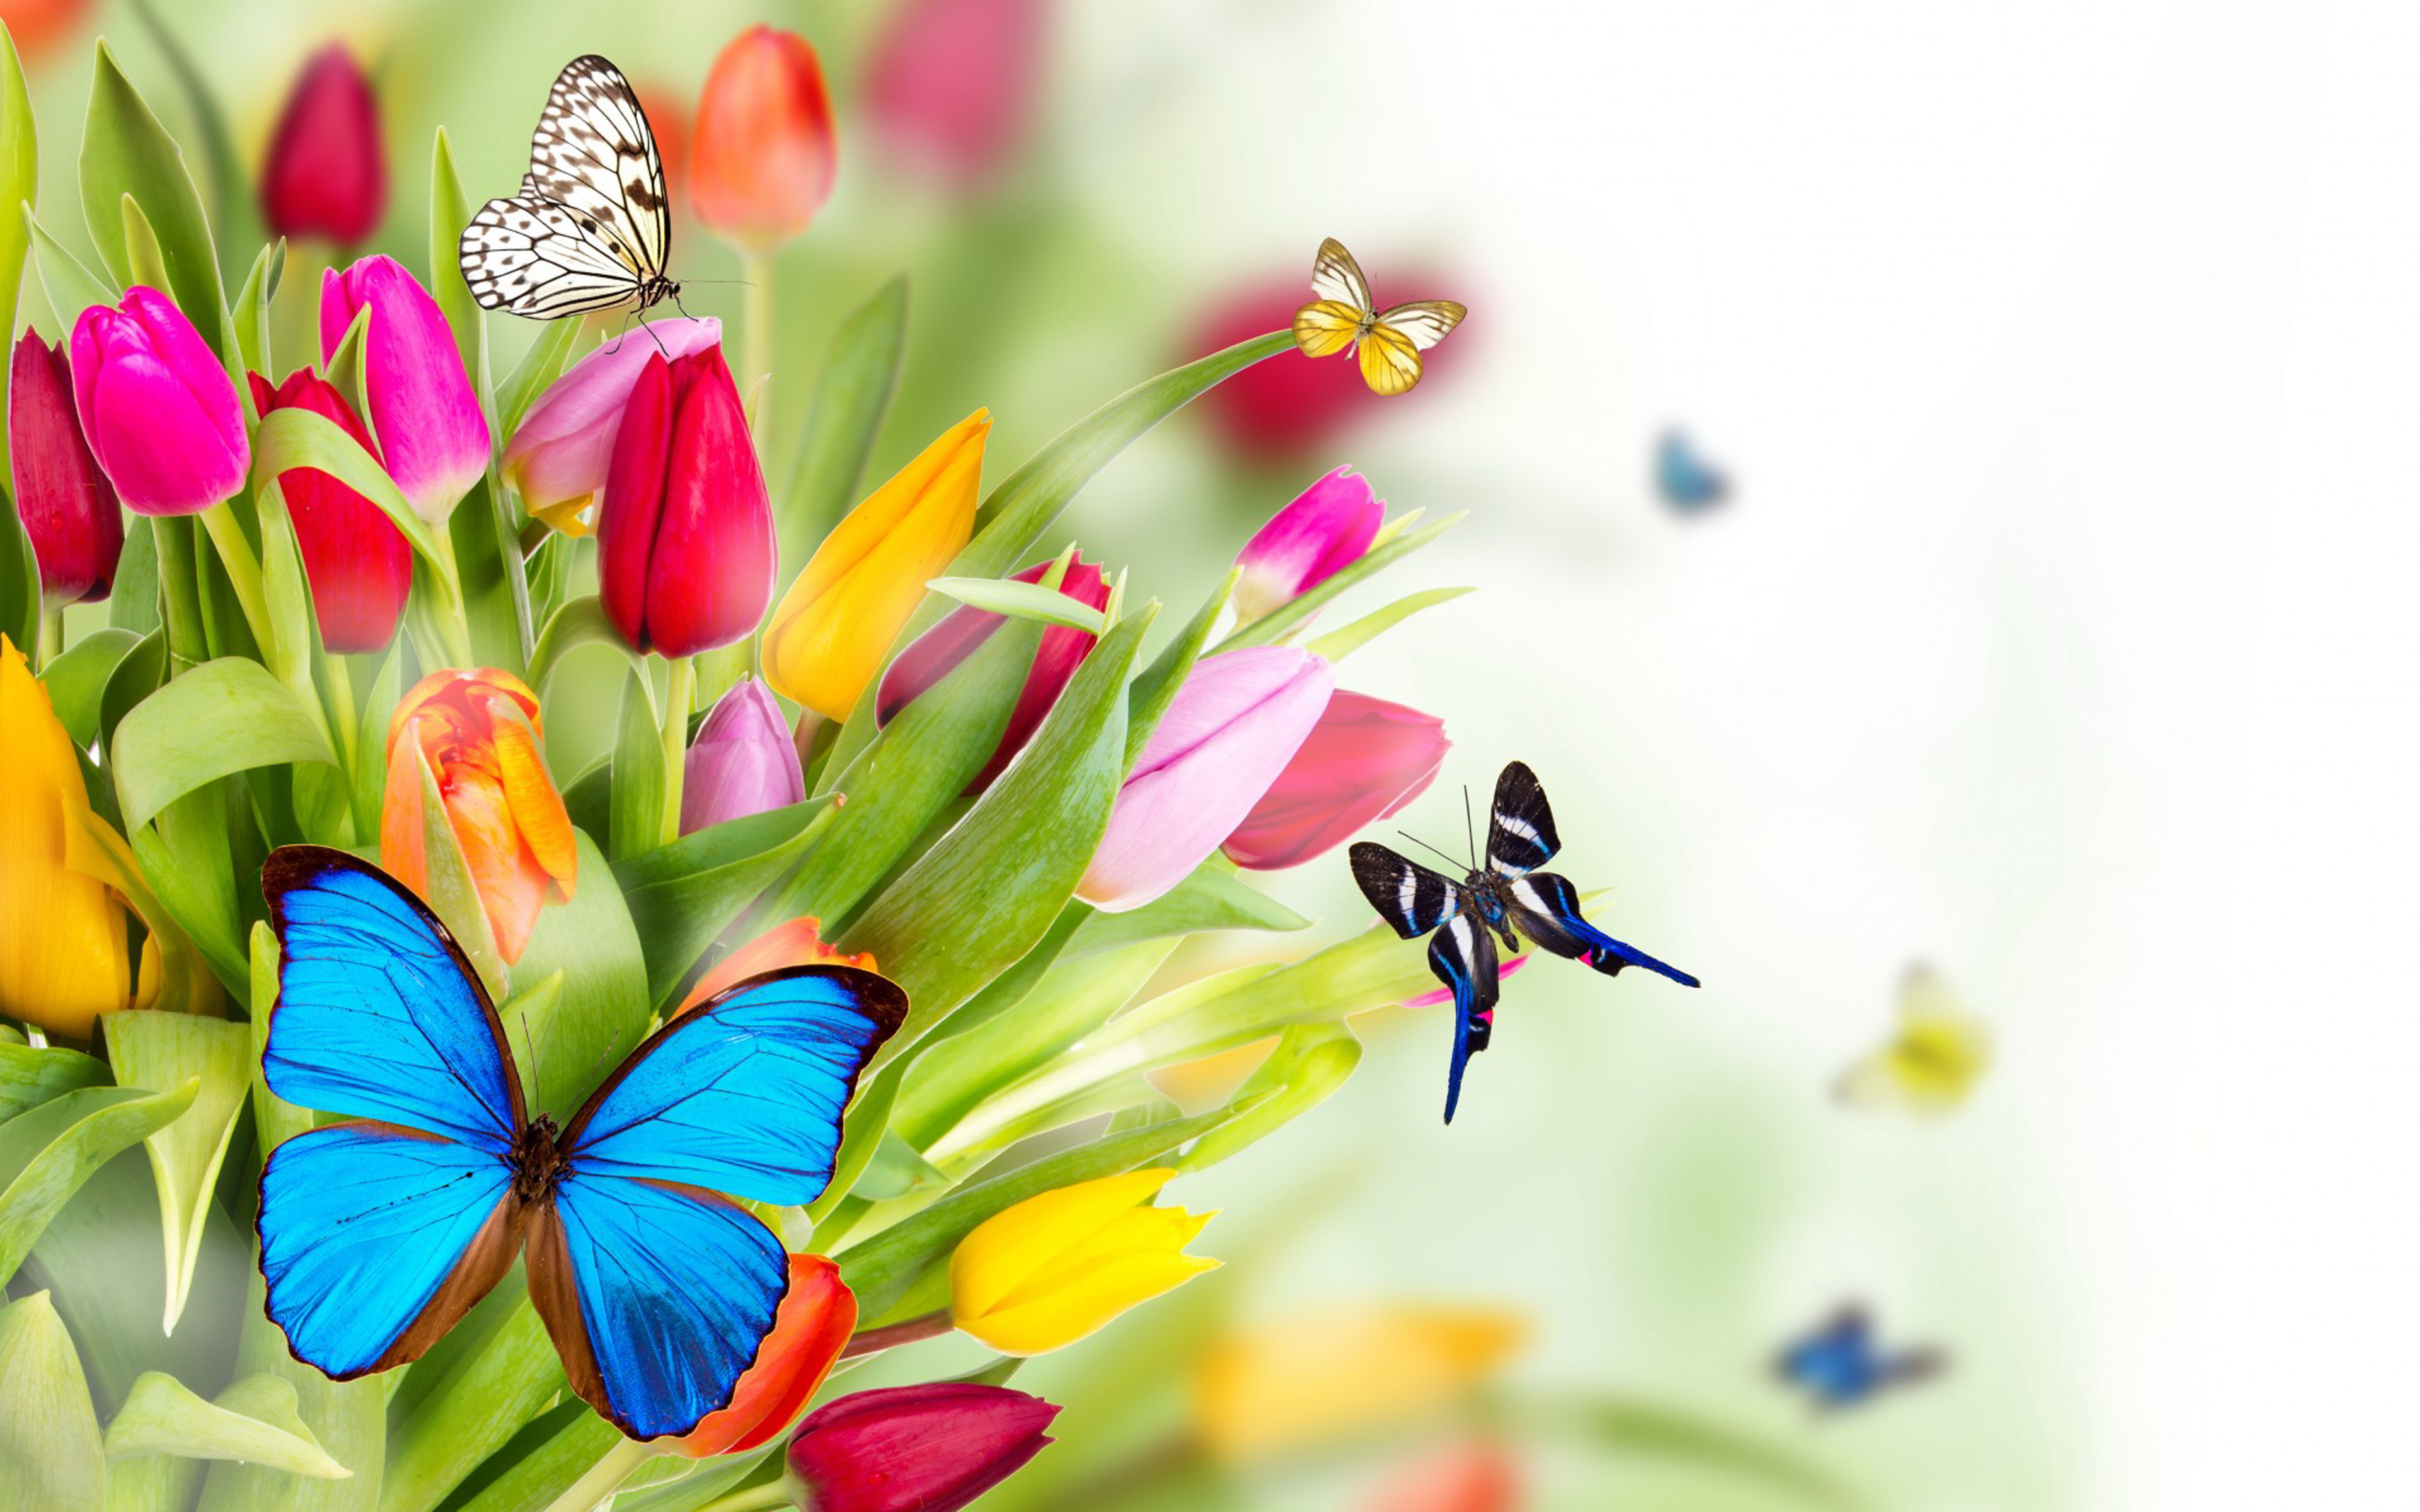 Spring Flowers Tulips Butterfly Windows Themes Best Hd Desktop Wallpapers For Tablets And Mobile